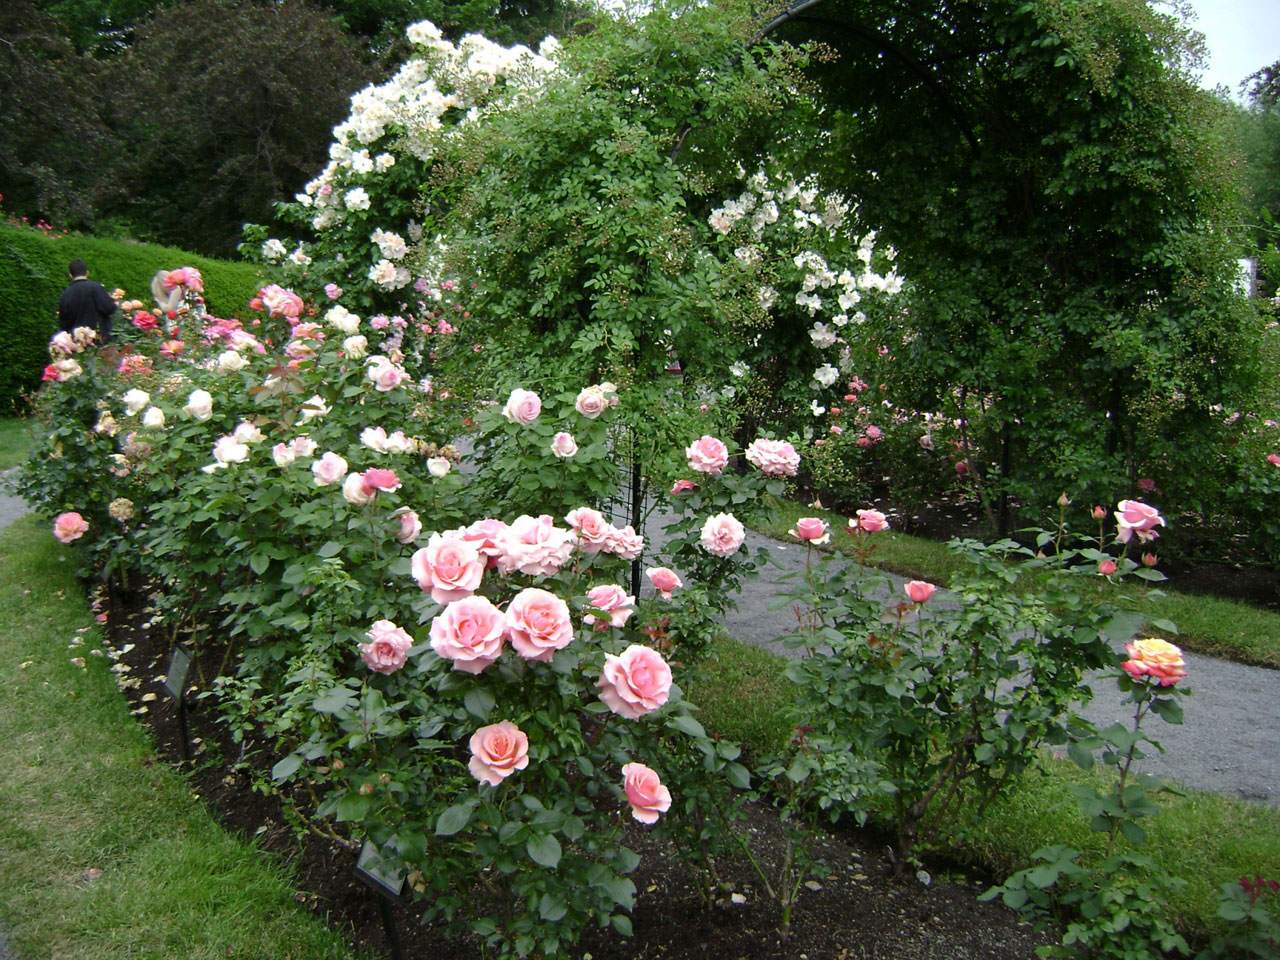 Beds of roses